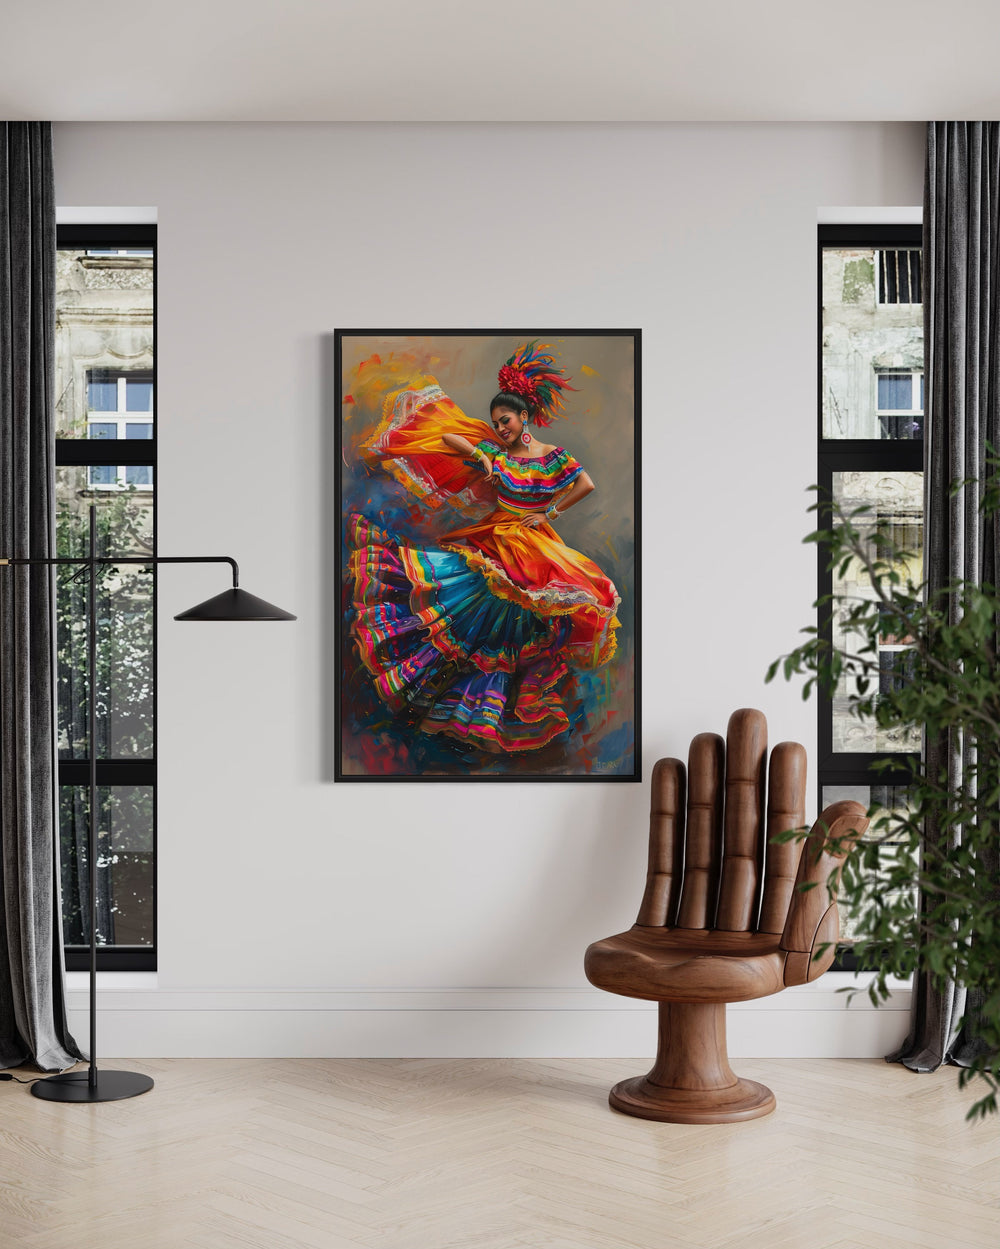 Mexican Woman Dancing Traditional Dance Framed Canvas Wall Art in living room